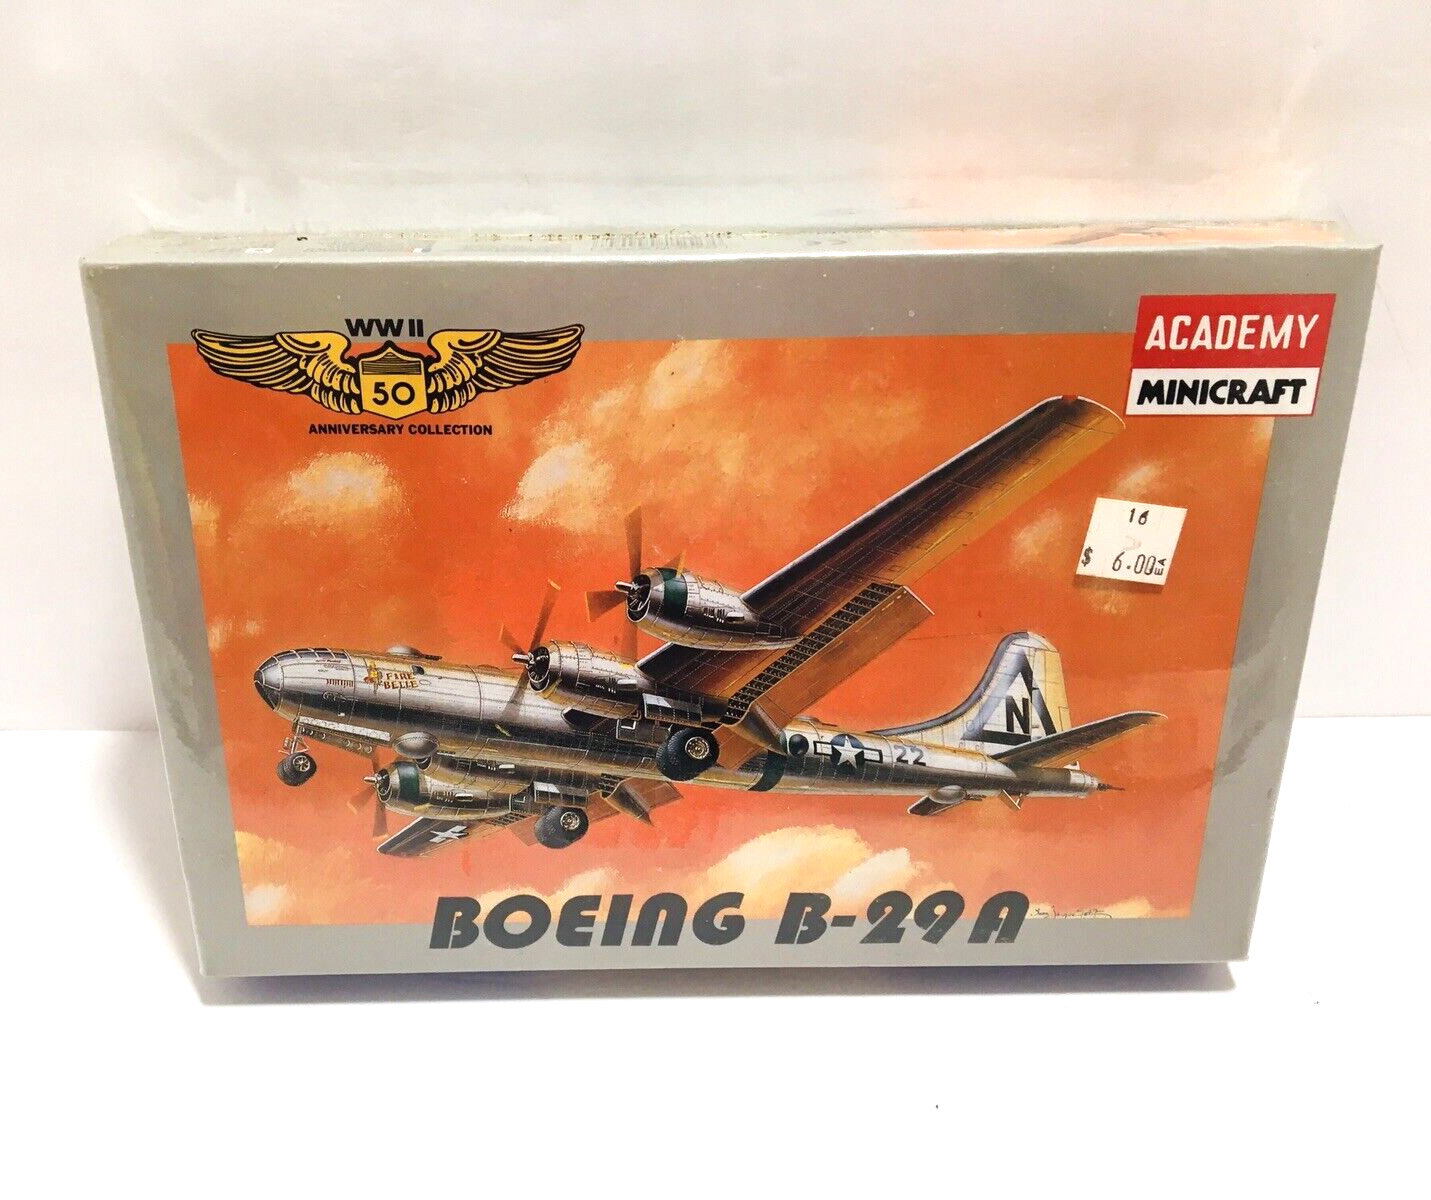 1:144 Scale Boeing B-29A SUPERFORTRESS Academy Minicraft Kit SEALED IN BOX NIB - $20.85